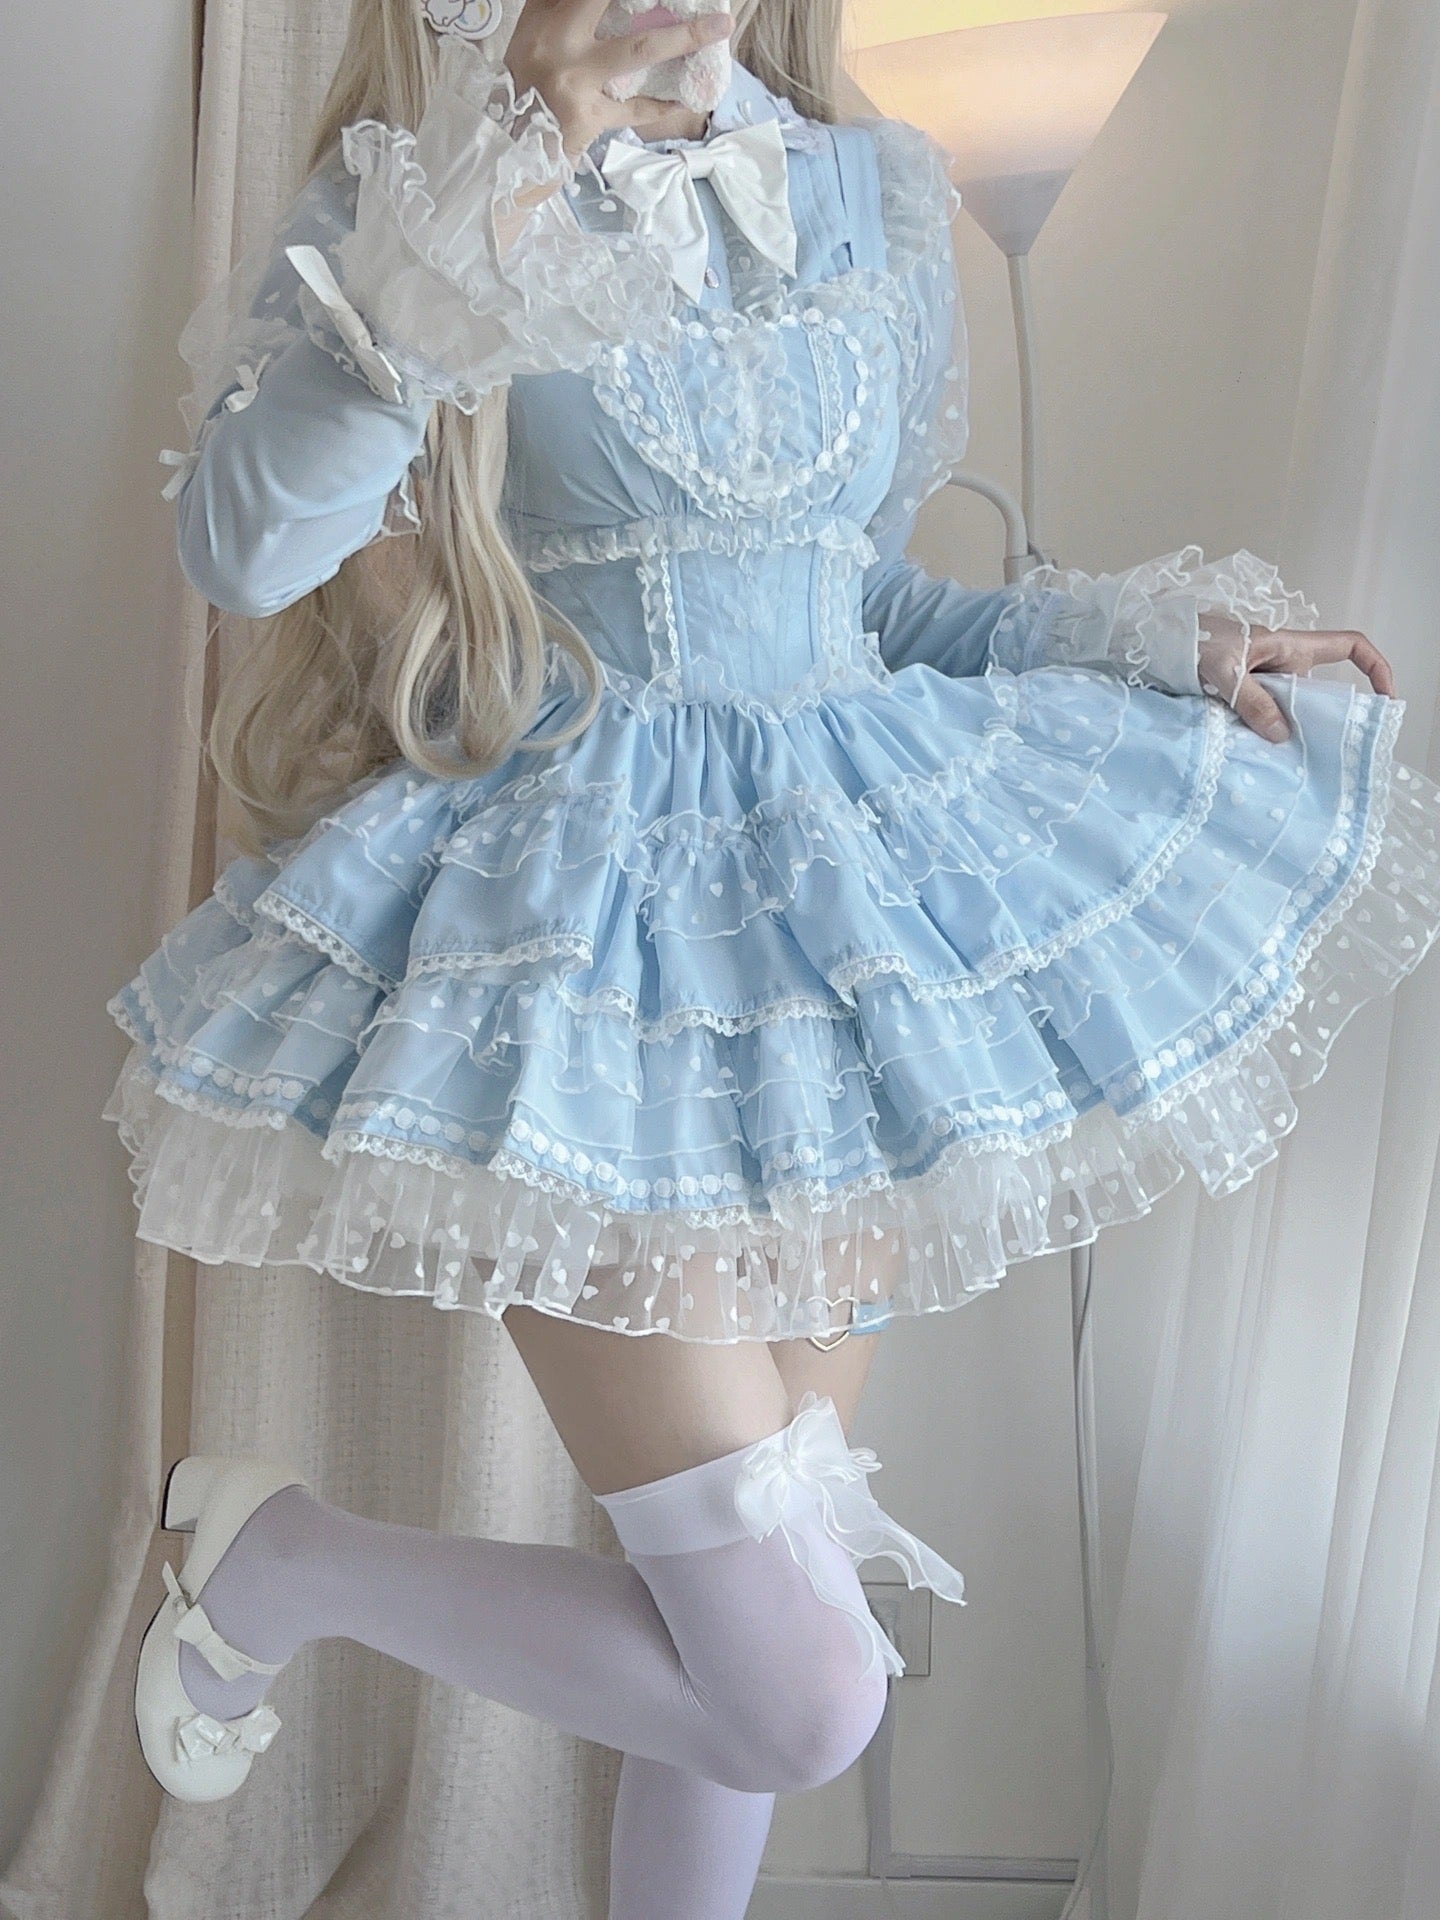 ♡ Sweet Wishes ♡ - Dolly Dress